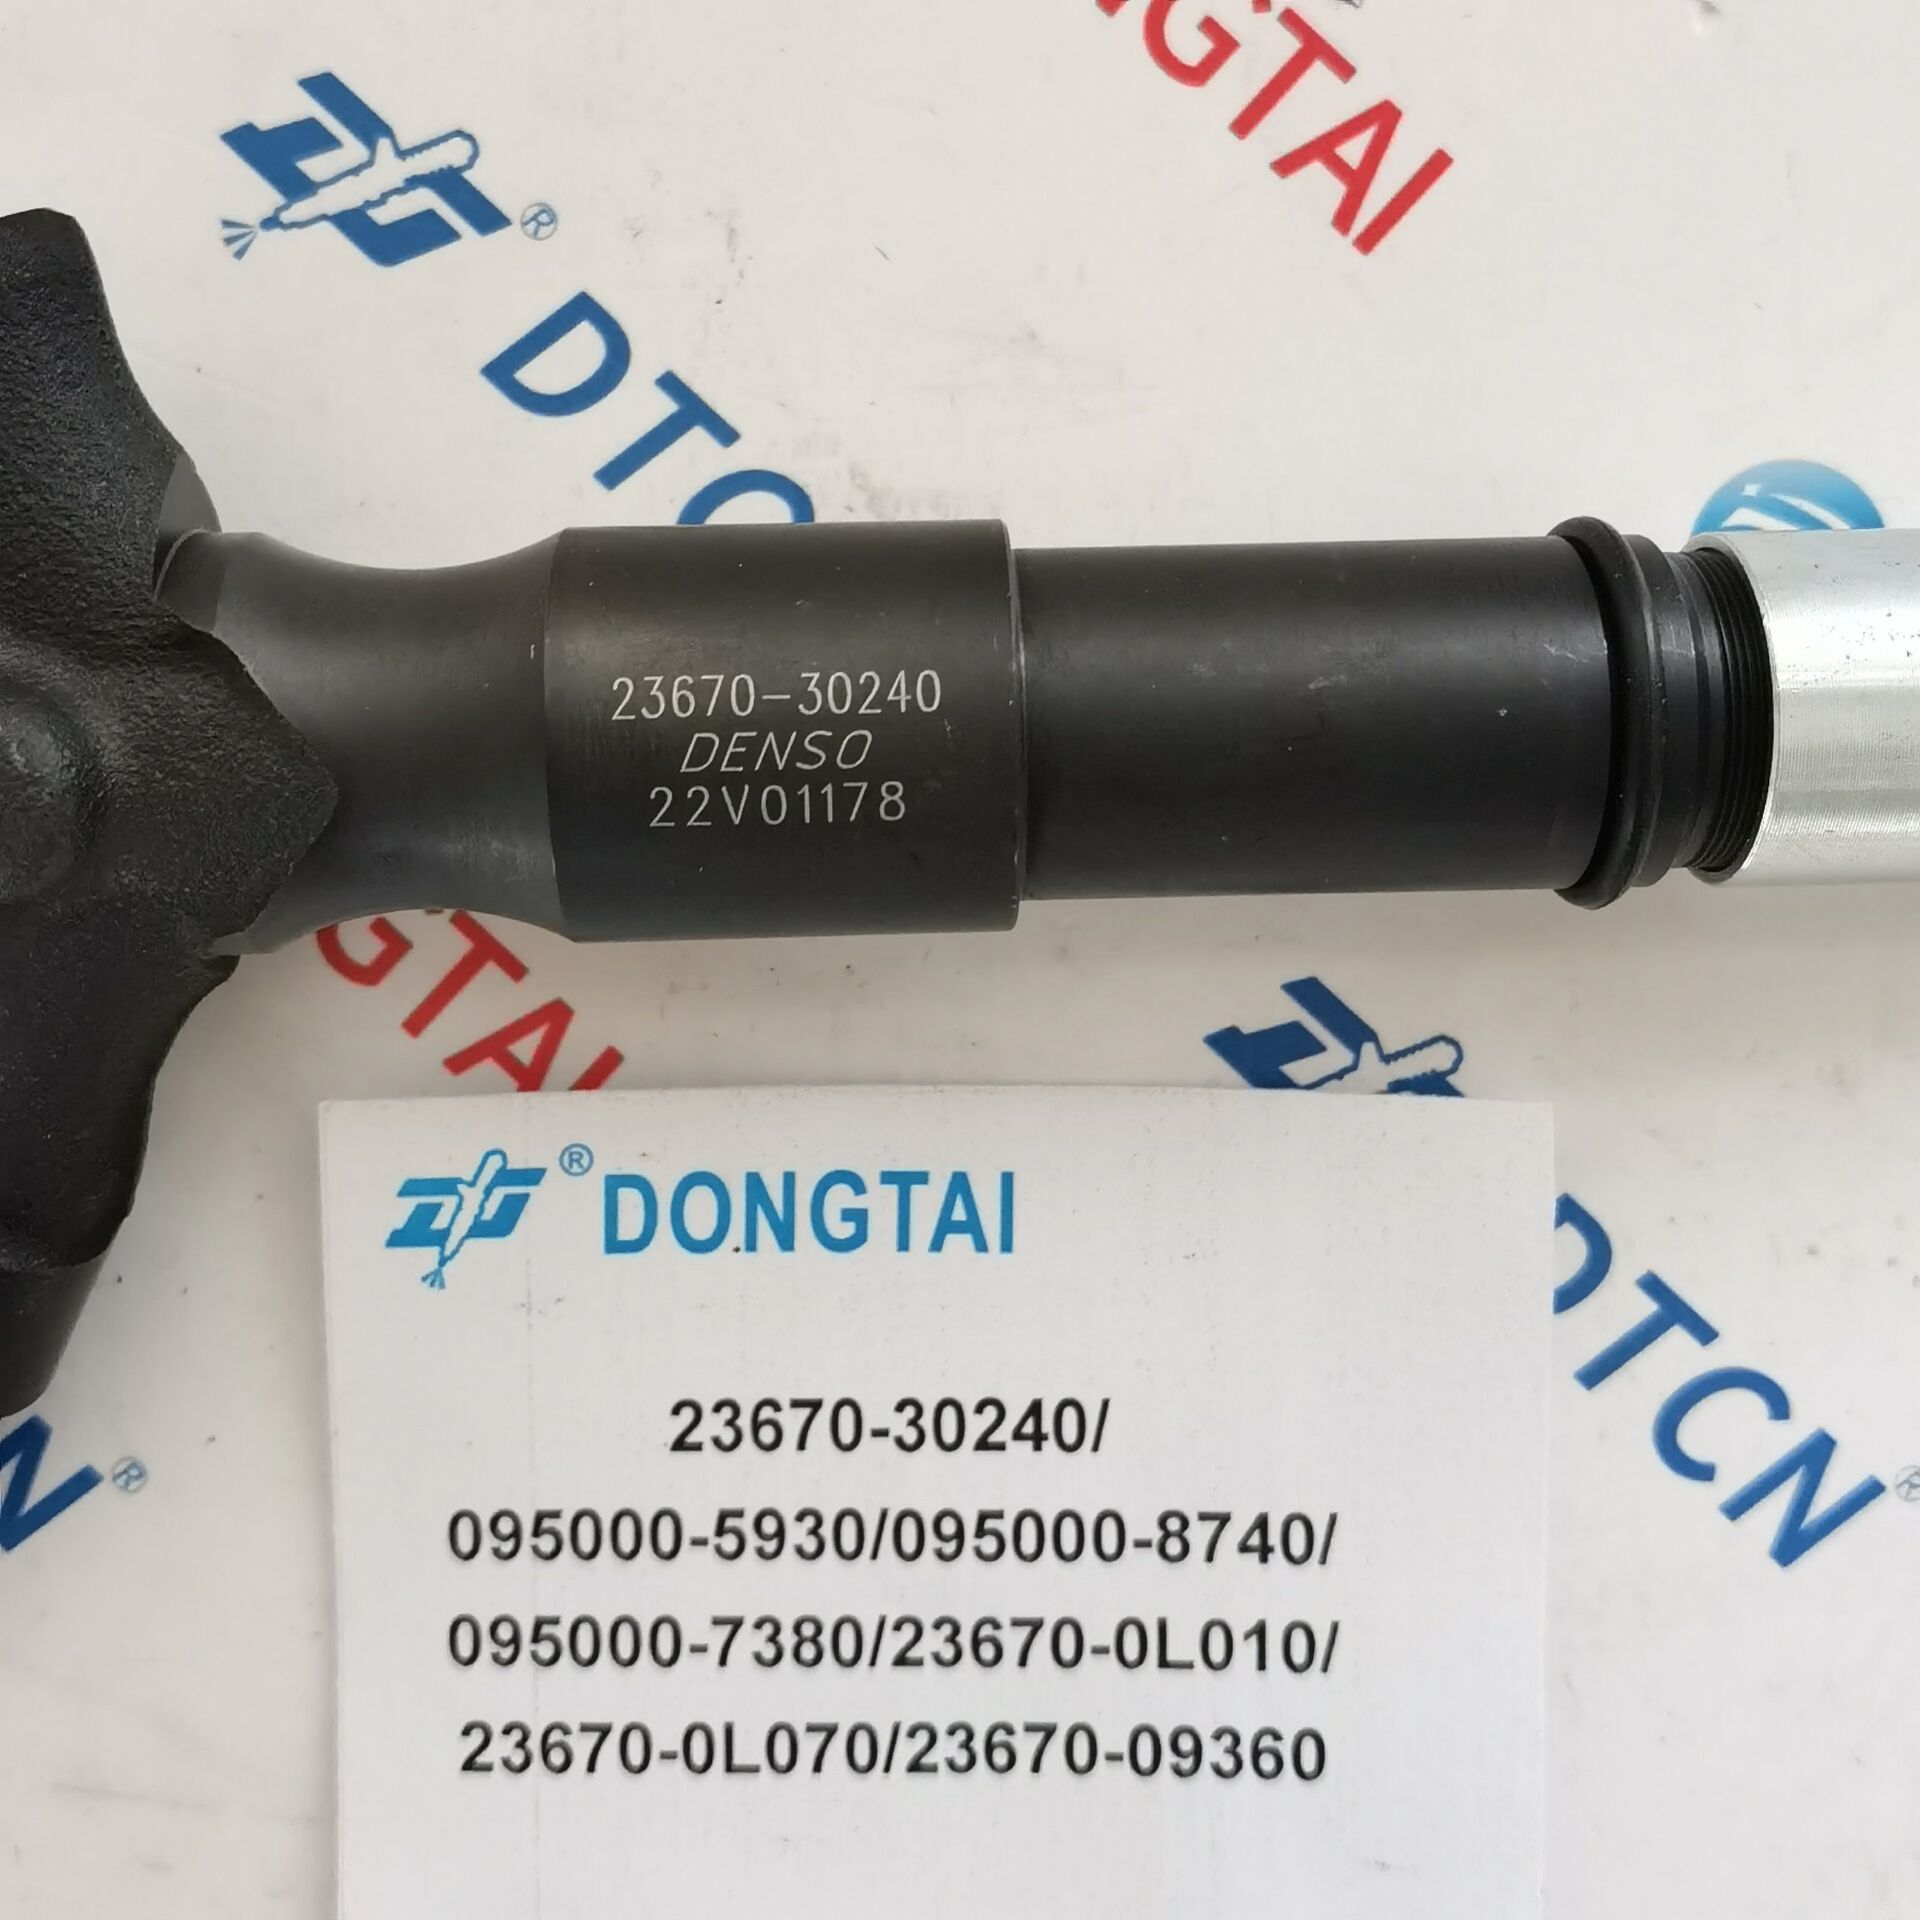 Best-Selling Bosch Cp2.2 Pump Relief Valve 2 469 403 530 - DENSO Common Rail Injector 23670-30240/095000-5930/095000-8740/095000-7380/23670-0L010/23670-0L070/23670-09360 For TOYOTA – Dongtai